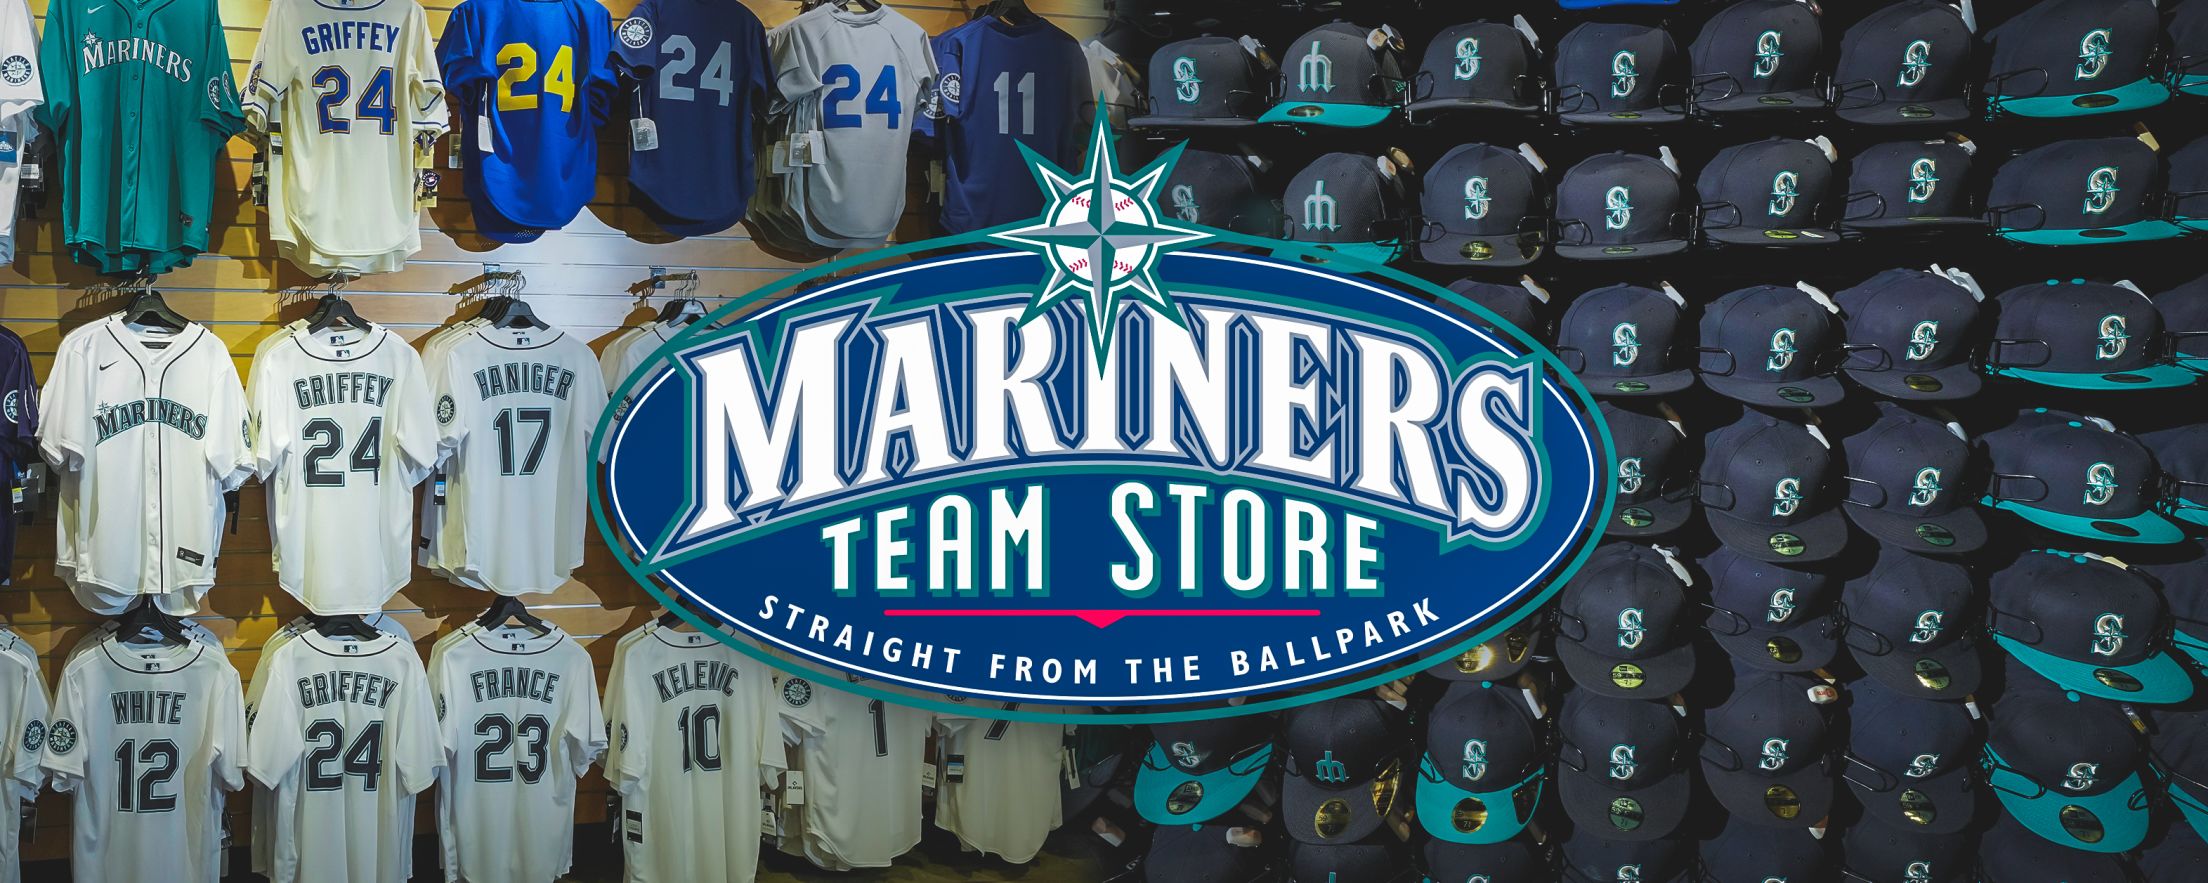 Mariner Muse] The Mariners Team Store has dedicated an entire rack for Blue  Jays gear ahead of this weekend's series. : r/Torontobluejays